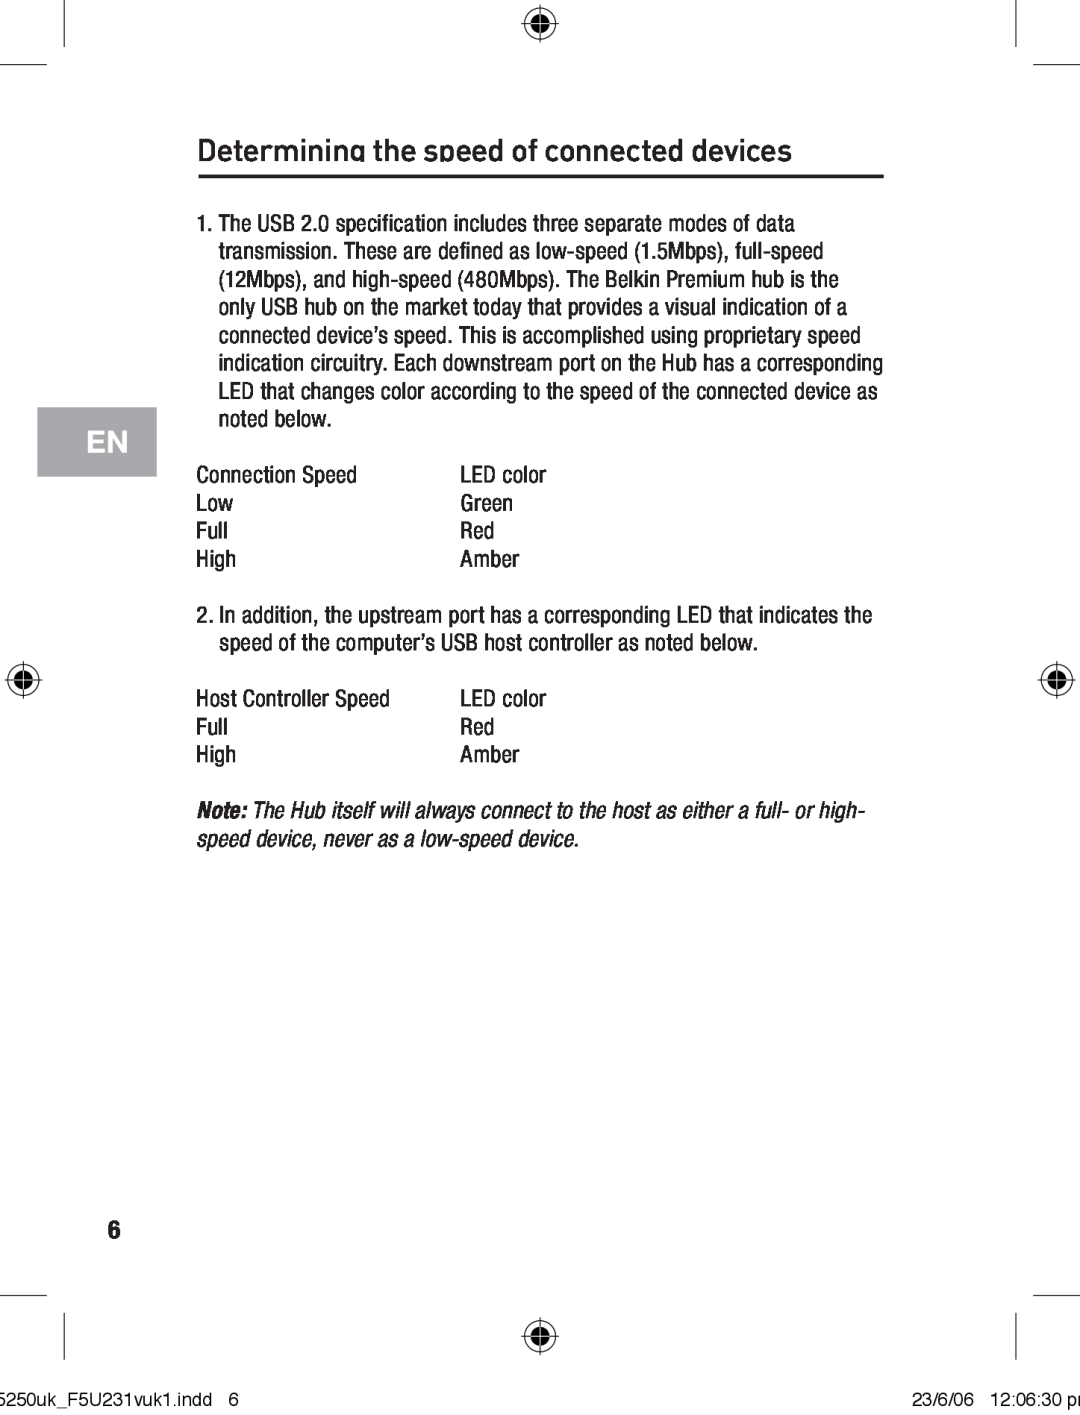 Belkin F5U231VUKI user manual Determining the speed of connected devices 